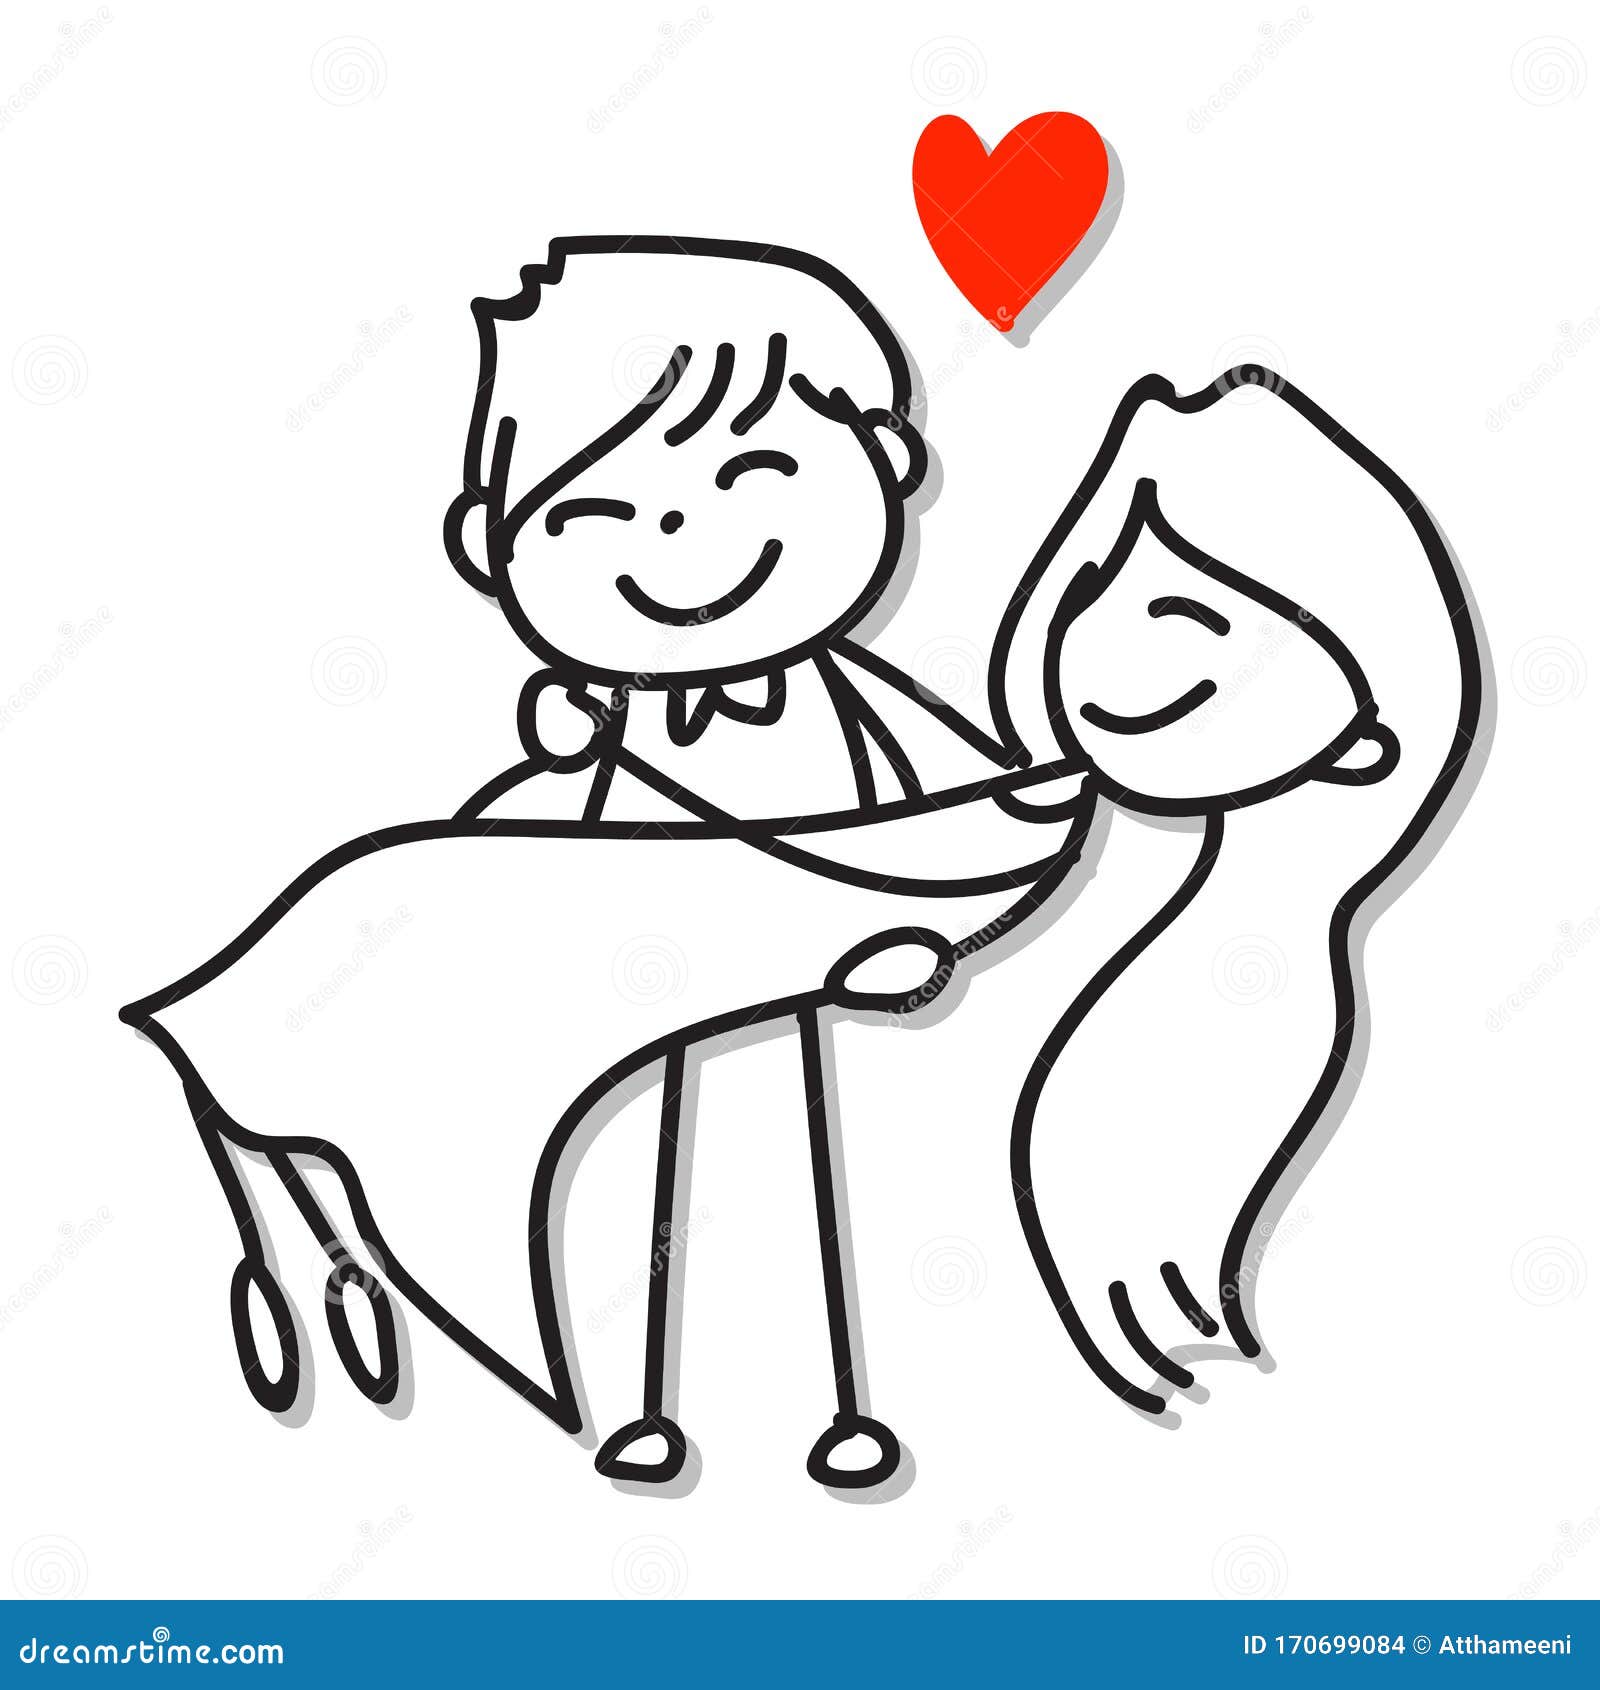 How to Draw Couple in Love (Valentine's Day) Step by Step